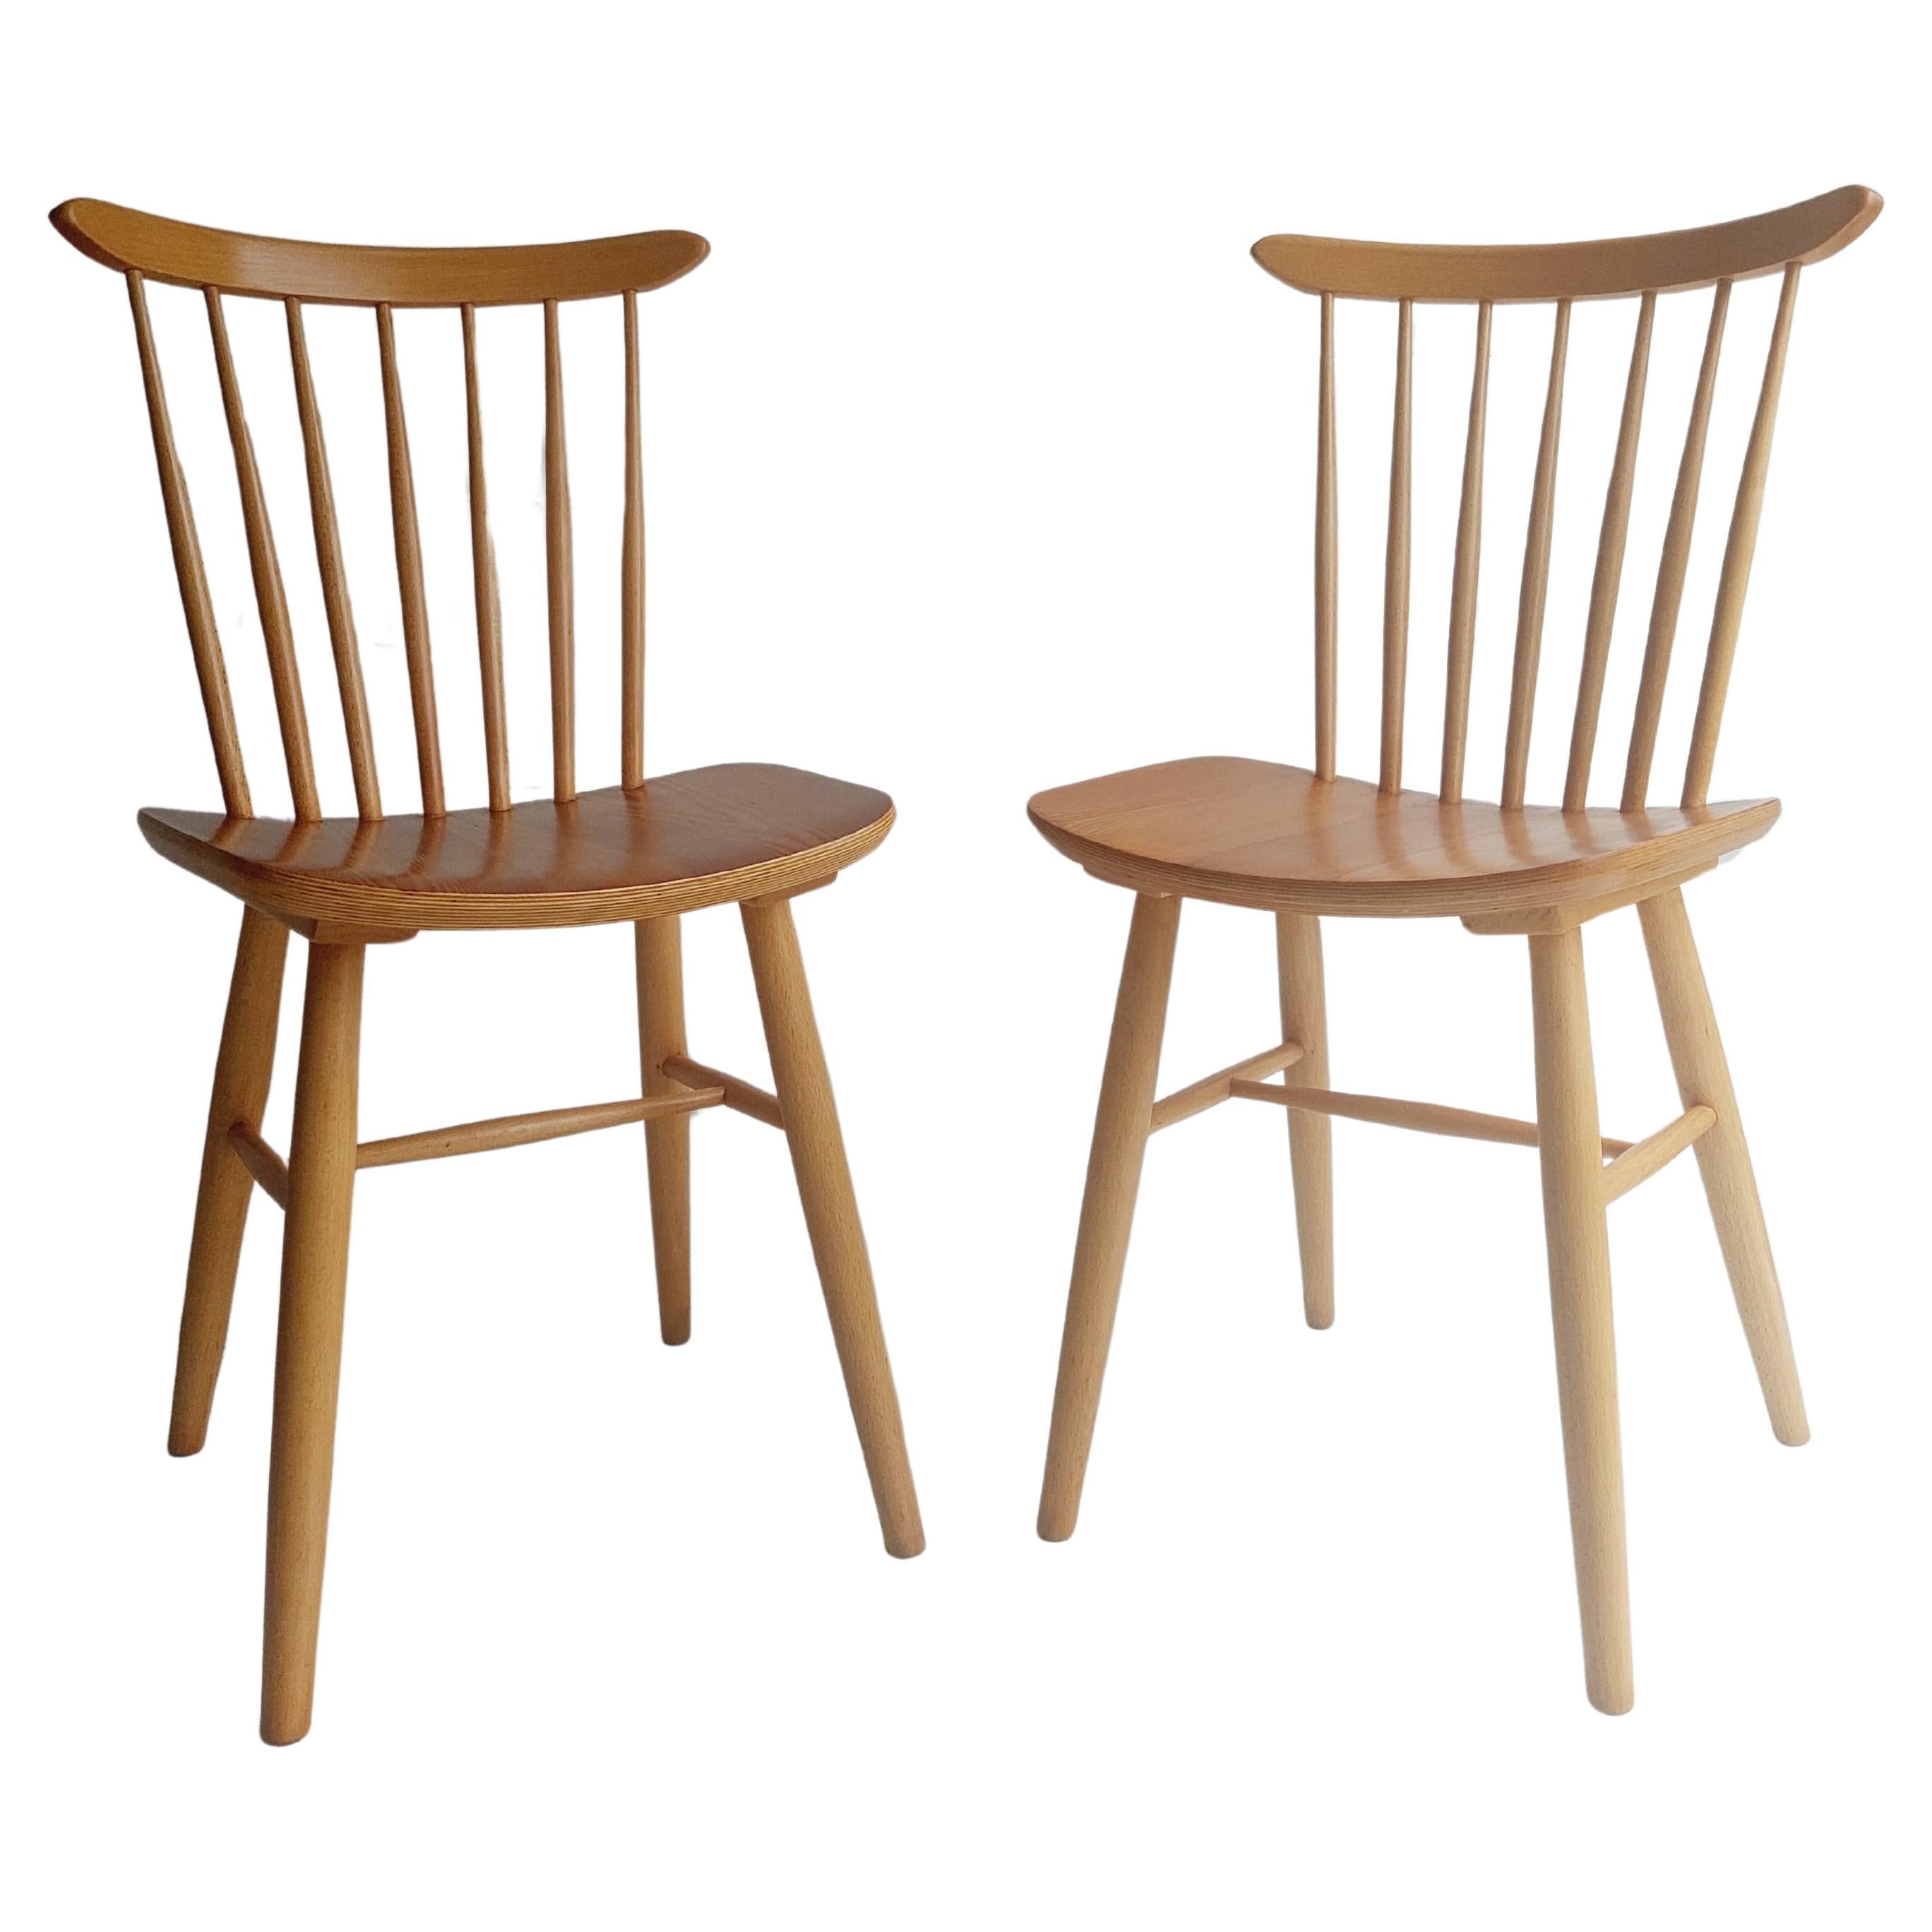  1950'S Czech Harlequin spindle back Dining Chairs By Ton Set of 2